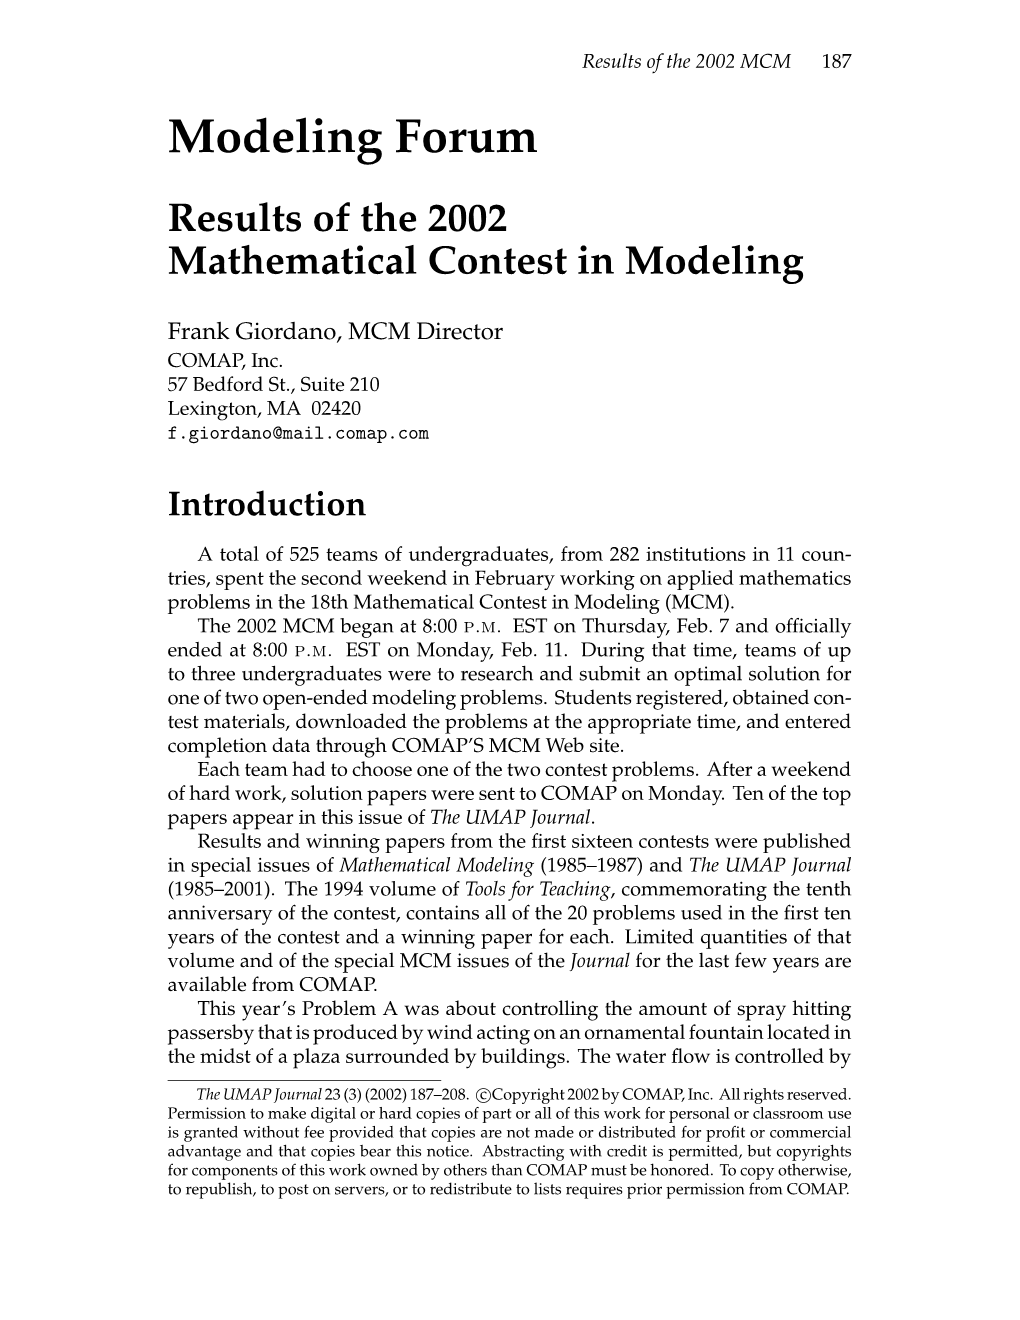 Modeling Forum Results of the 2002 Mathematical Contest in Modeling